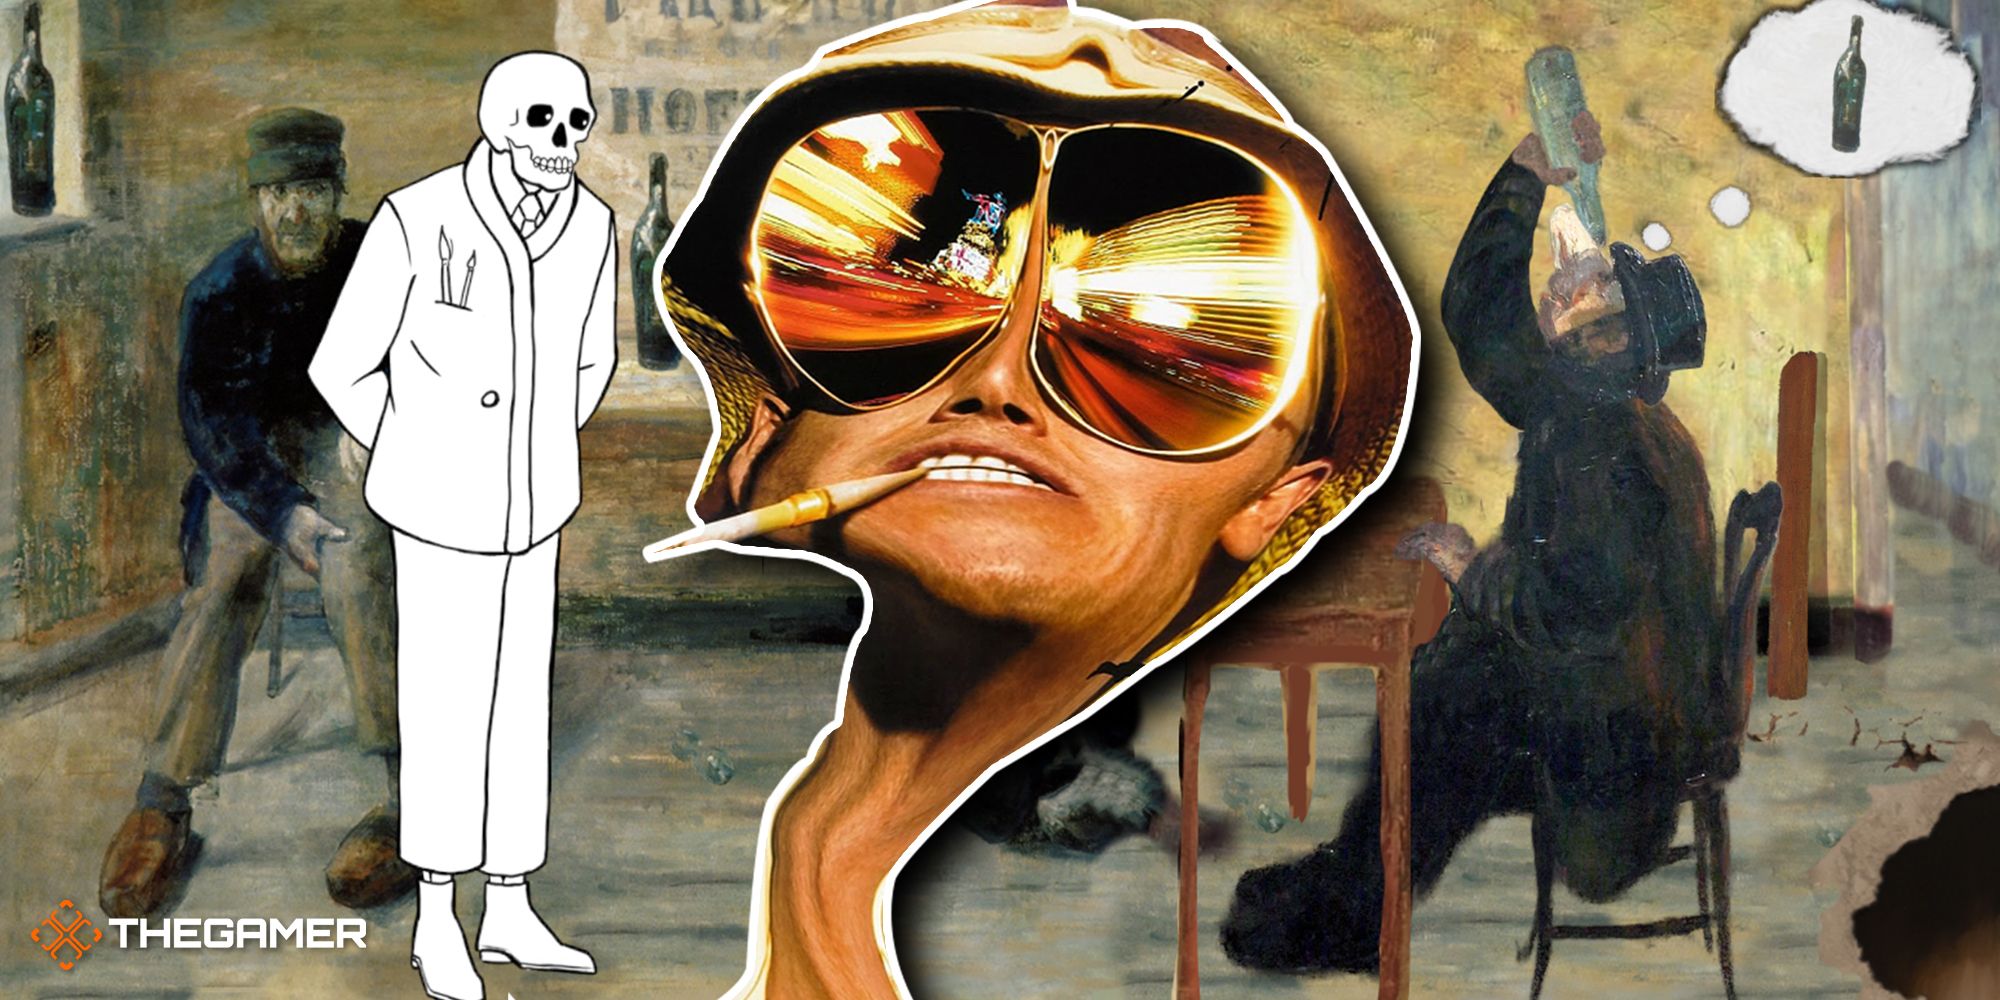 A black and white skeleton on the left, over a painting of a man drinking deeply from a bottle sitting on the right. In the middle is a distorted, stretched head of a man with lights in his sunglasses.